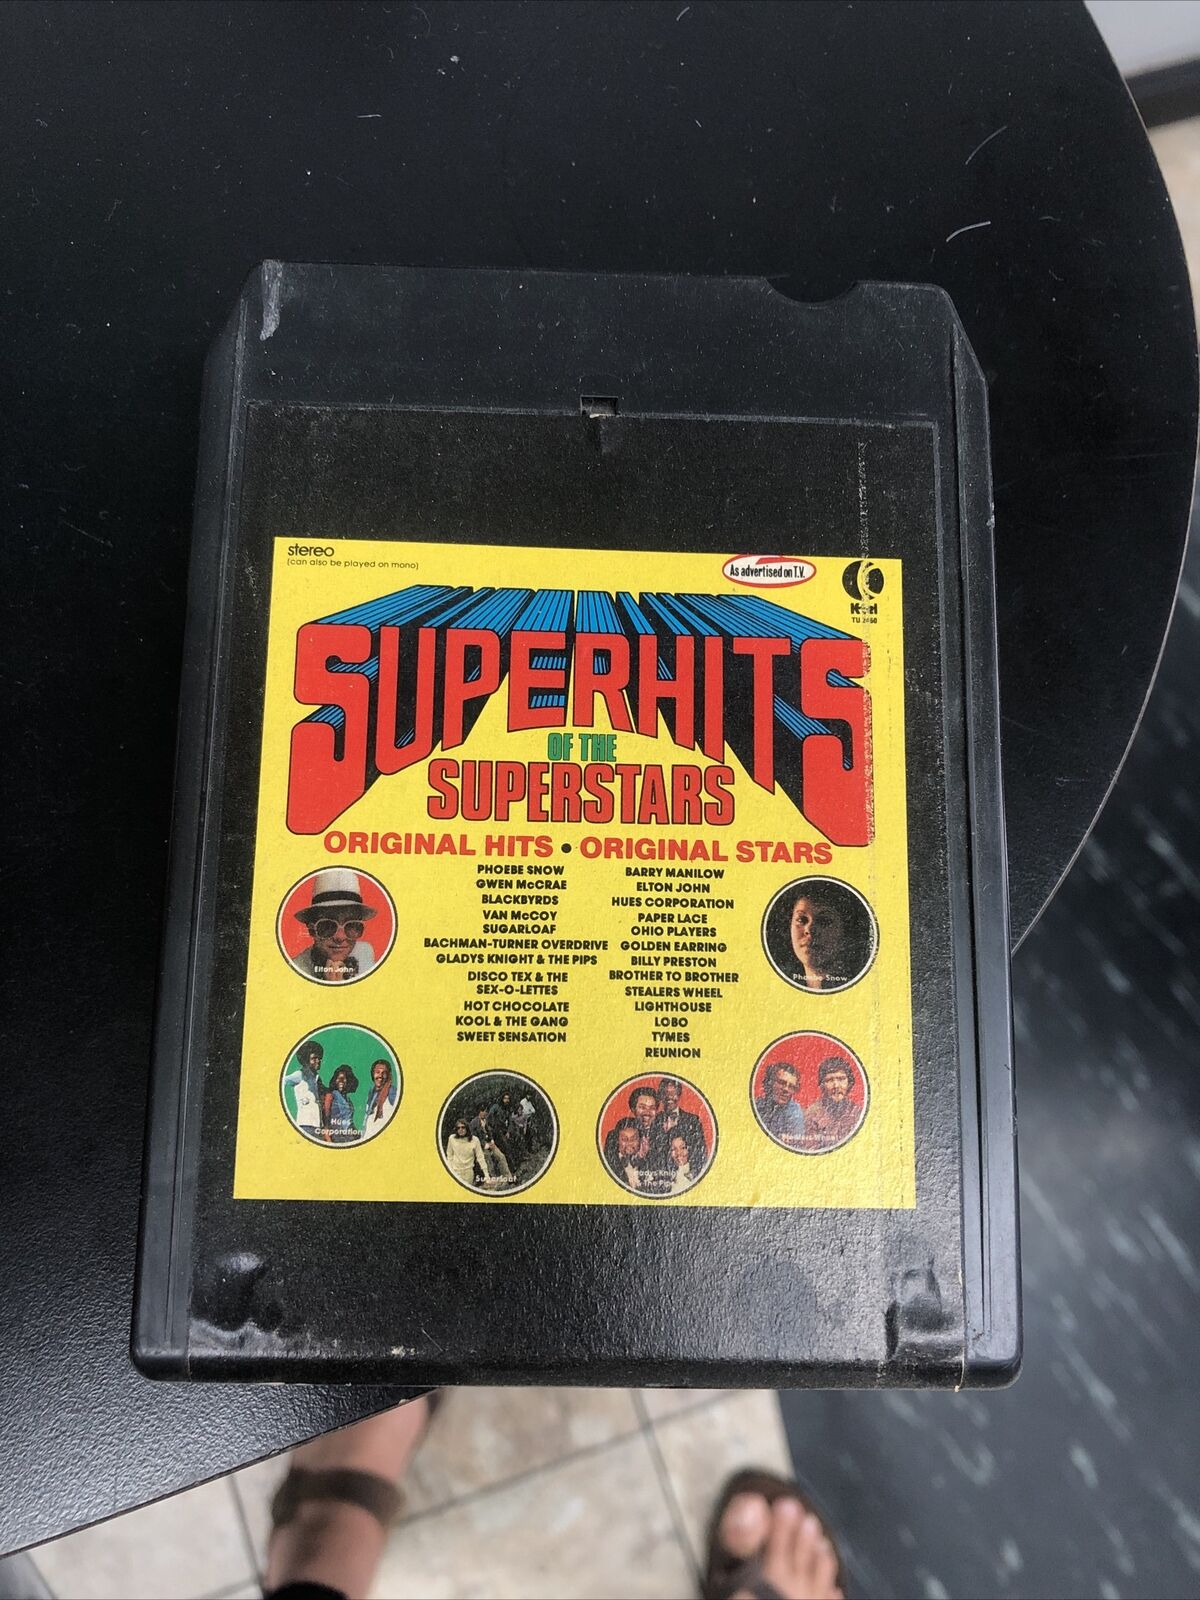 SUPER HITS OF THE SUPERSTARS 24581 8 Track Tape And 24582 Lot Of 2